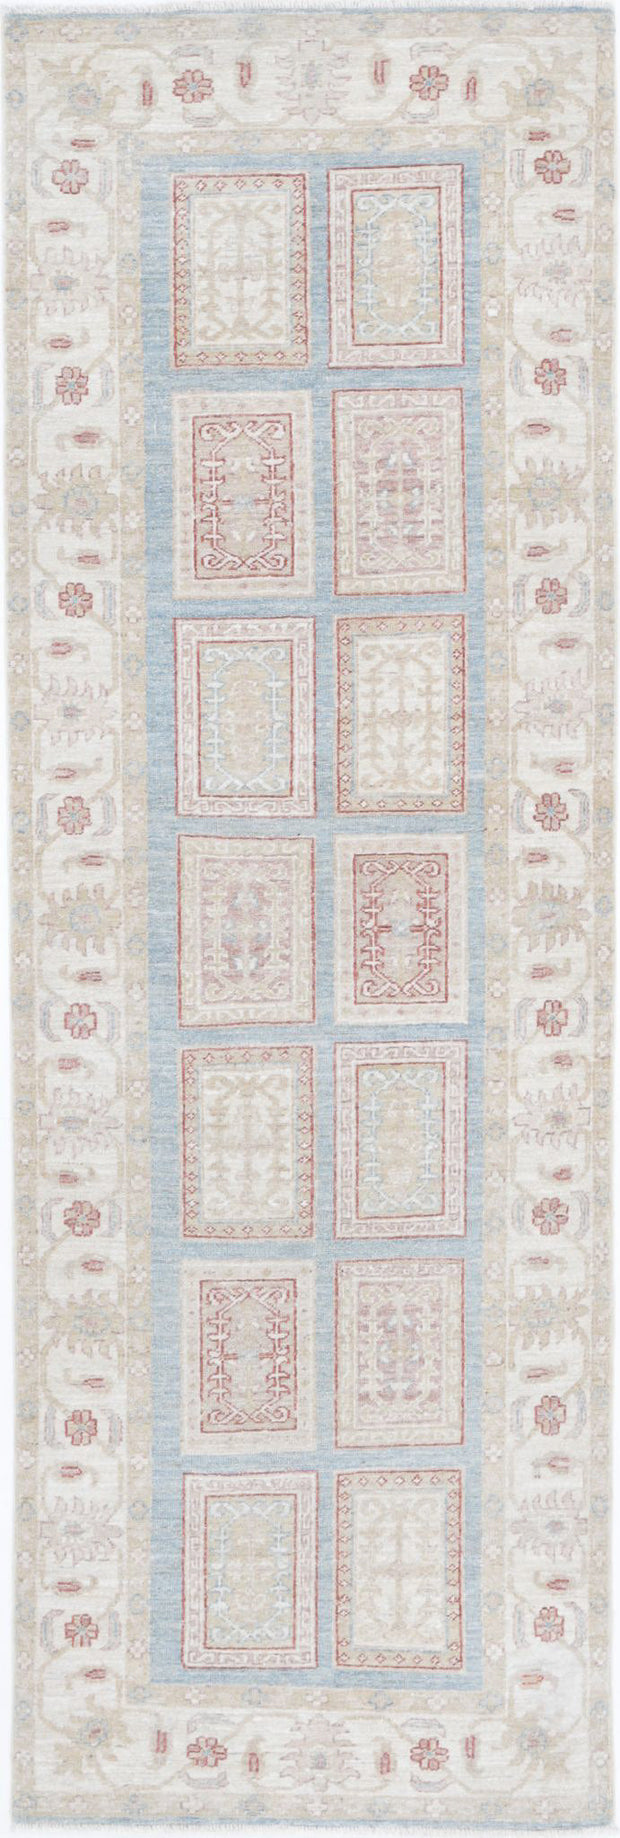 Hand Knotted Serenity Wool Rug 2' 7" x 8' 2" - No. AT47246